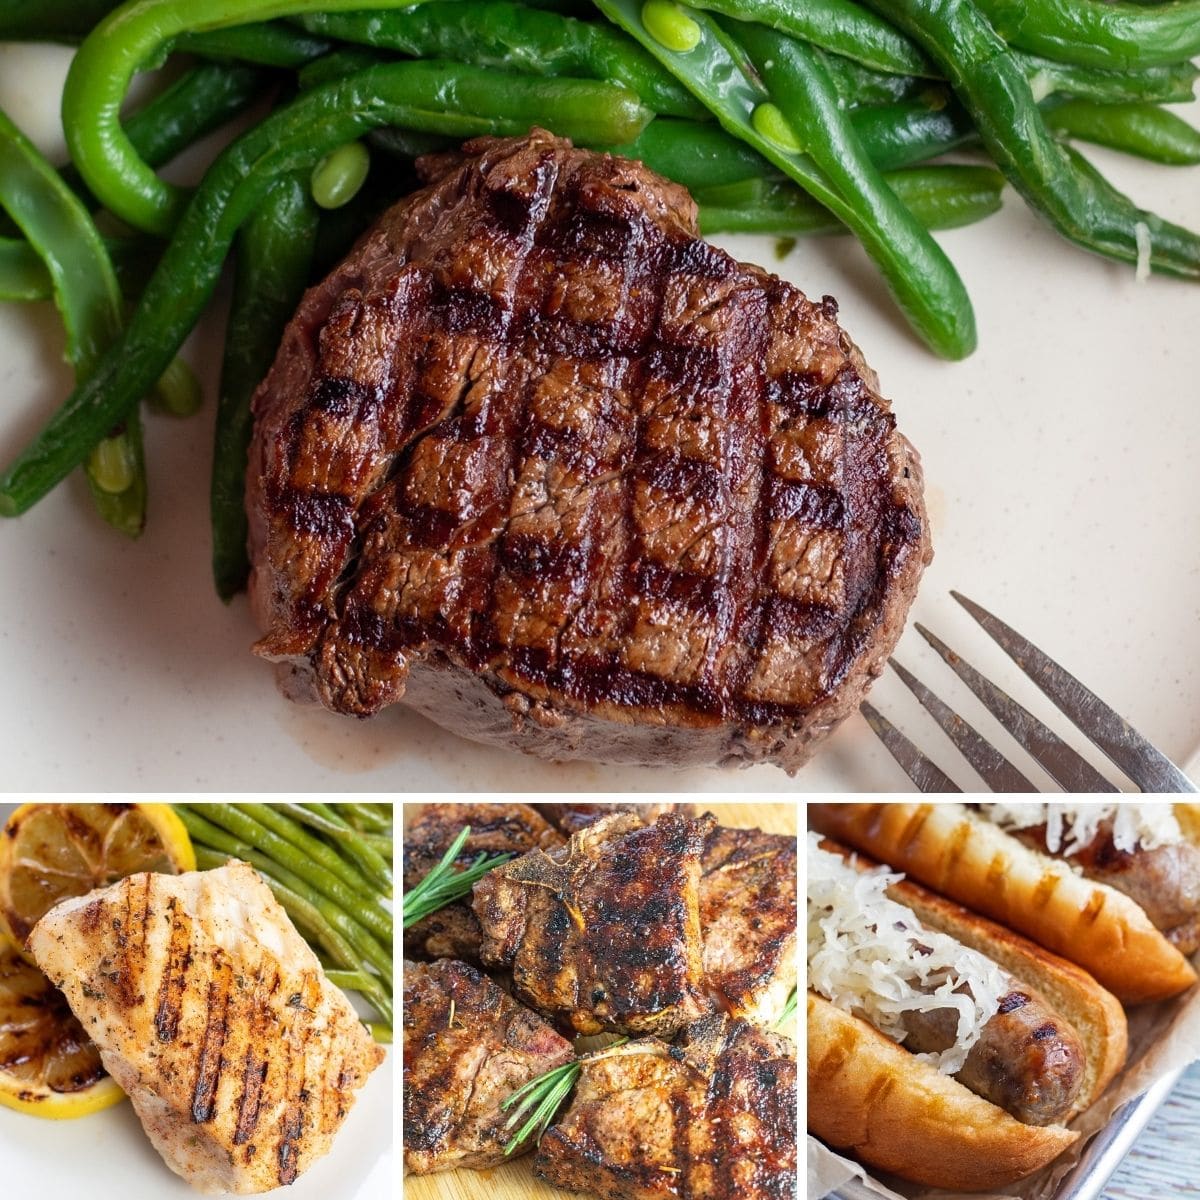 Best grill recipes collection with collage image showing 4 recipes that are grilled to perfection.